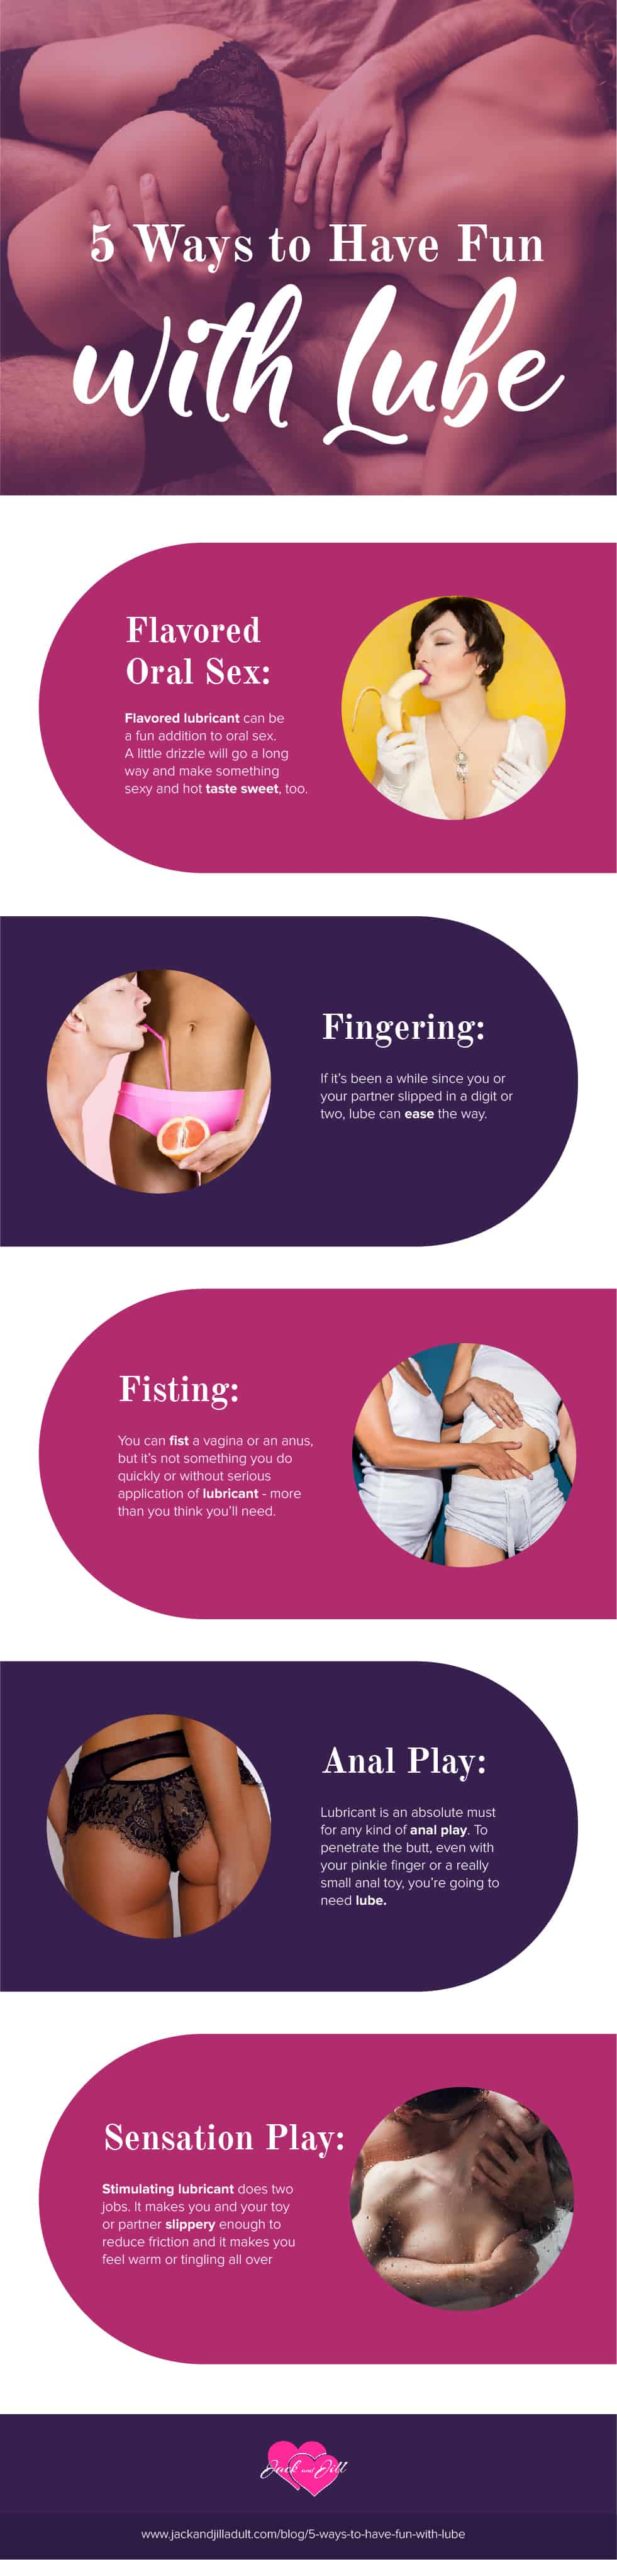 Infographic for 5 Ways to Have Fun With Lube